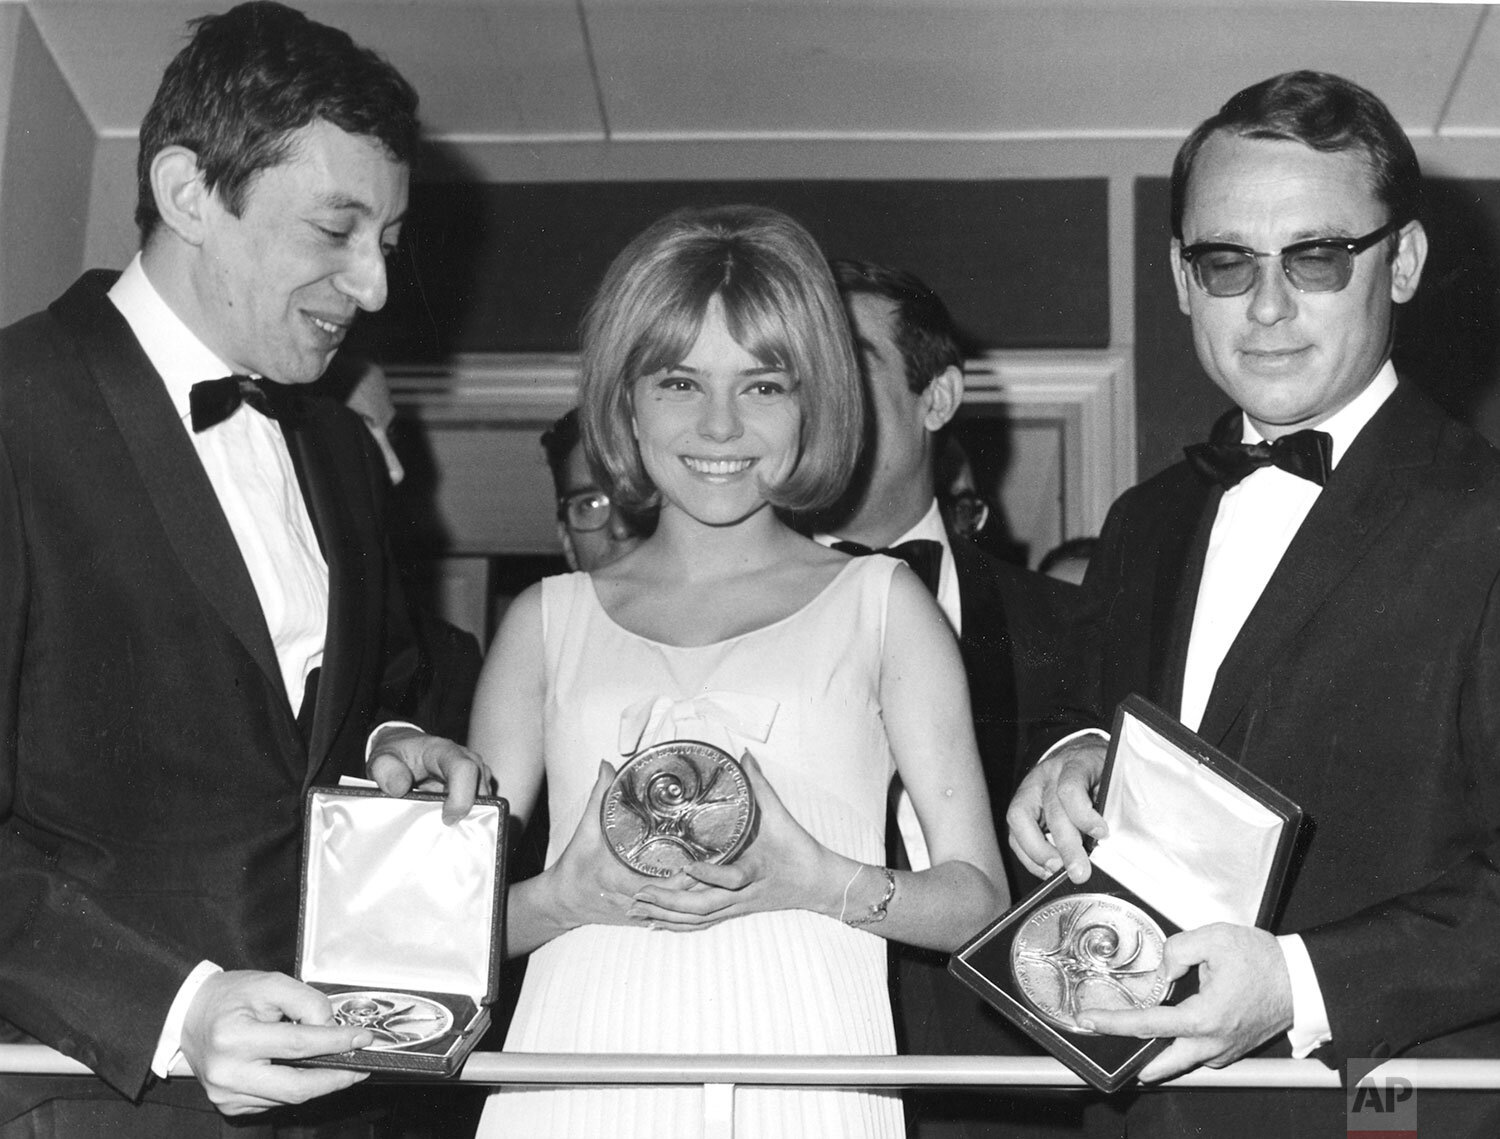  18-year-old French singer France Gall, singing for Luxembourg in the Eurovision Song Contest, proudly presents her winning medal for performing the Serge Gainsbourg, left, song "Poupee de Cire, Poupee de Son" (Wax Doll, Rag Doll) with orchestra dire